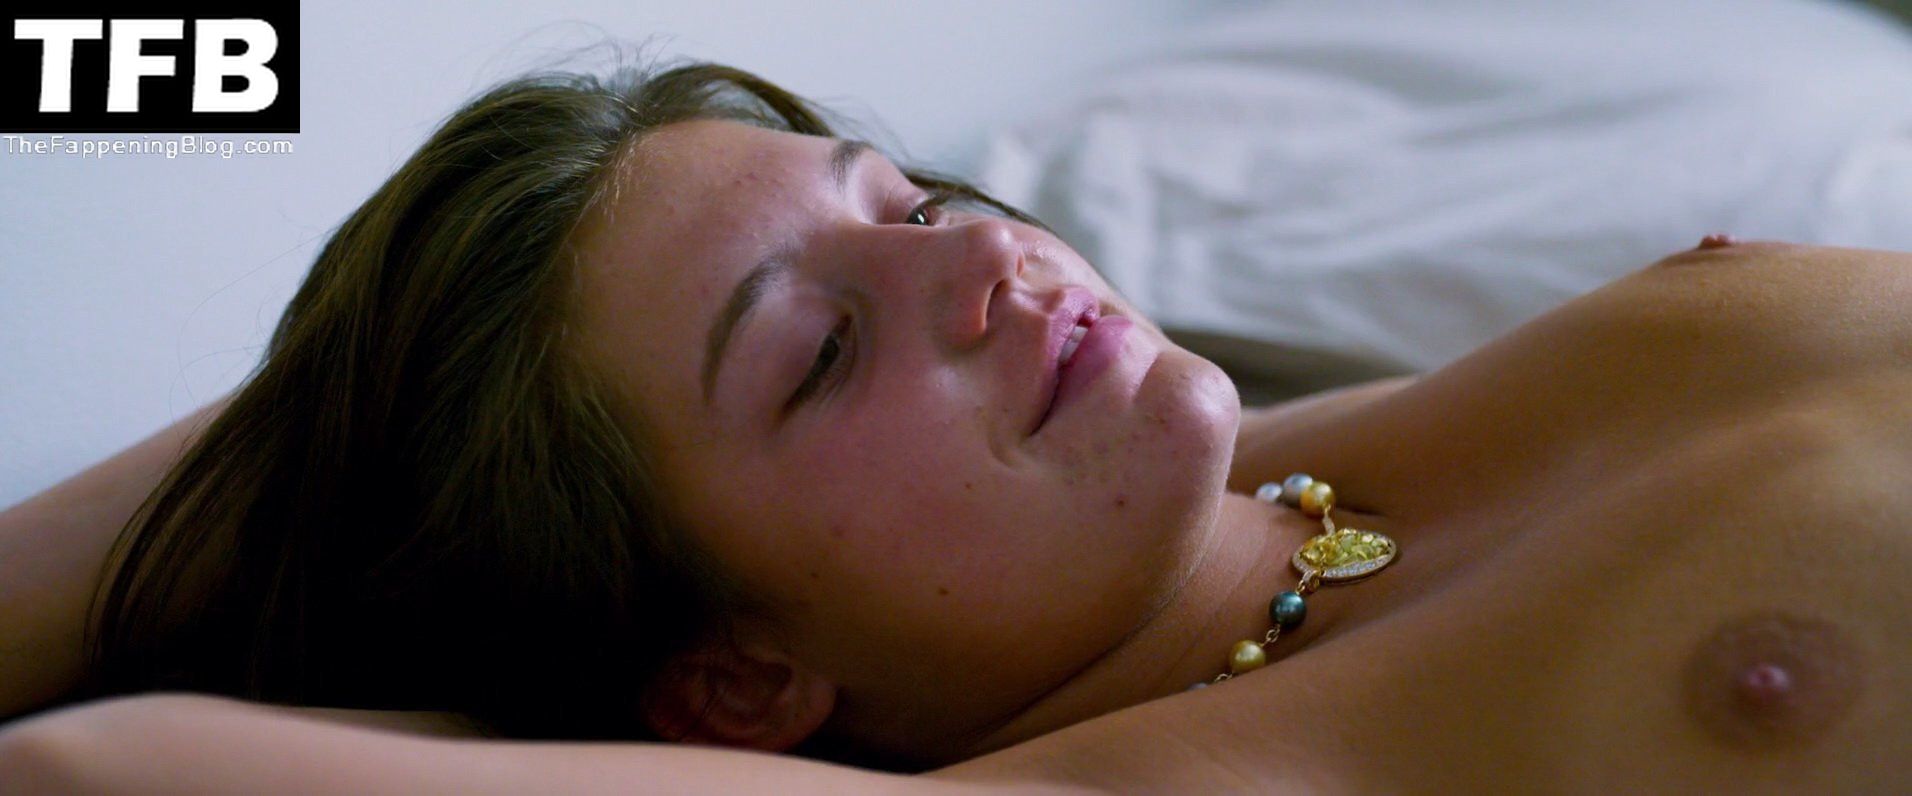 adele-exarchopoulos-orphan-39802-thefappeningblog.com_.jpg